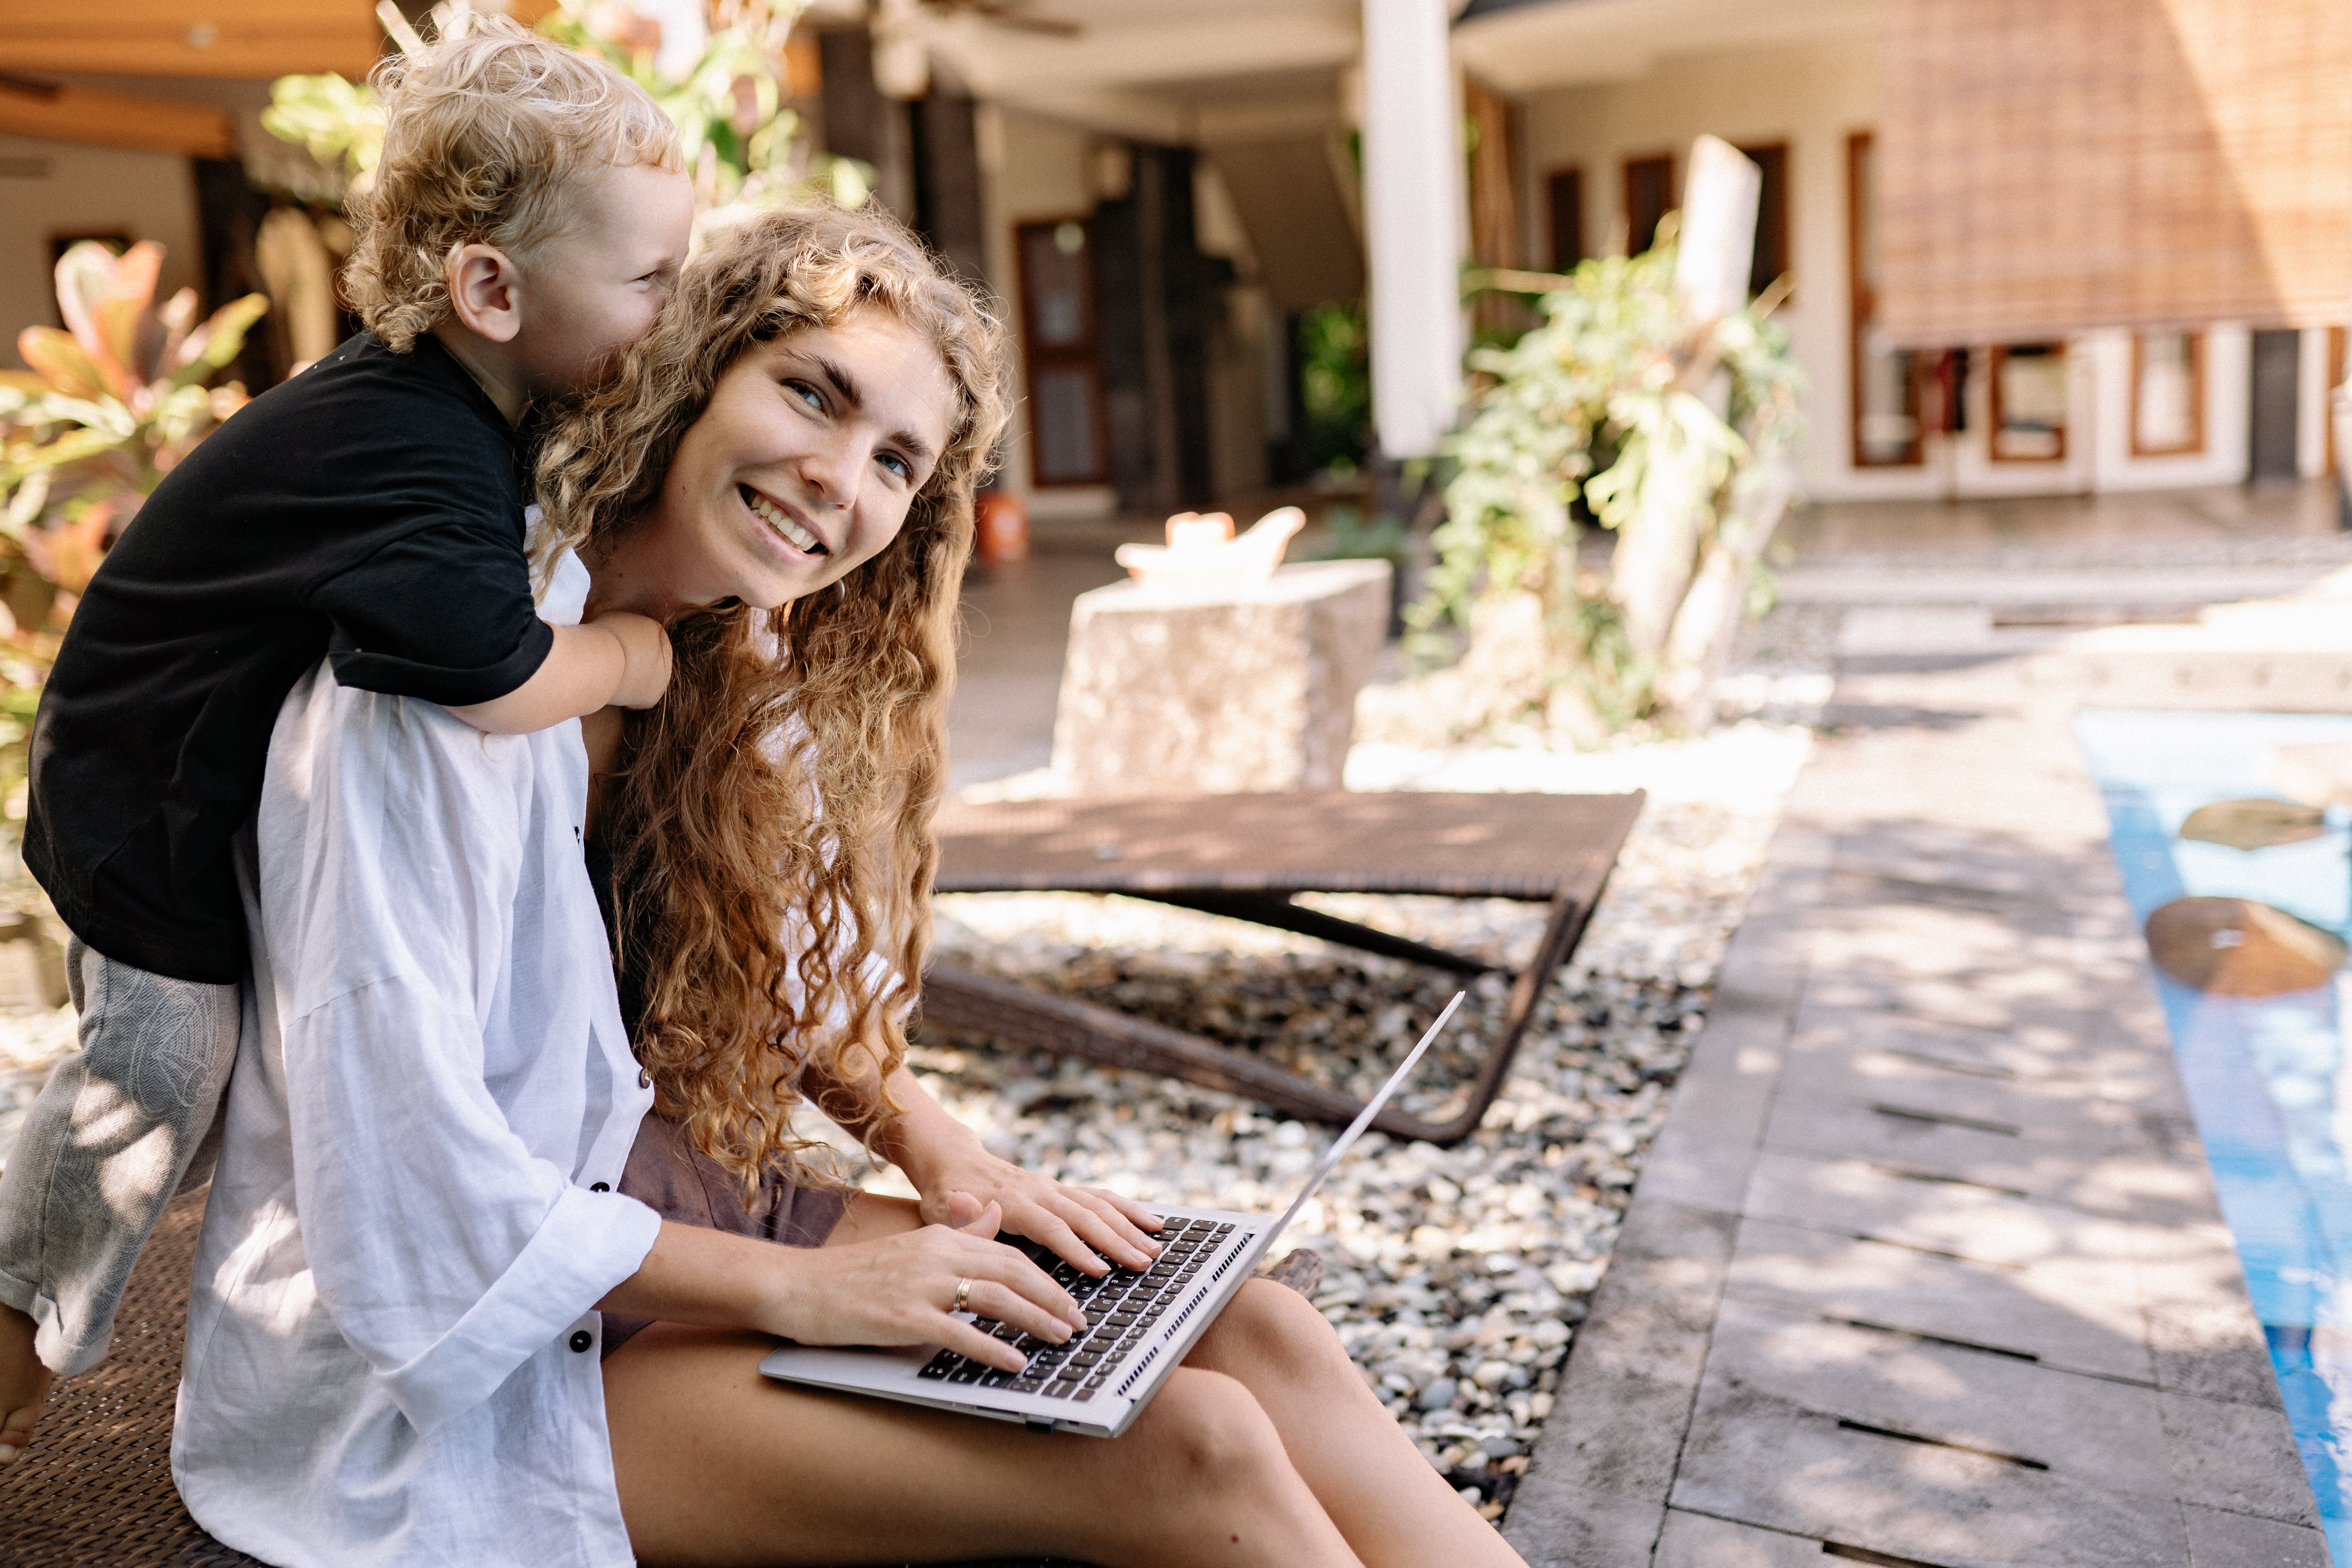 smiling mom being hugged by son from behind while she types on laptop